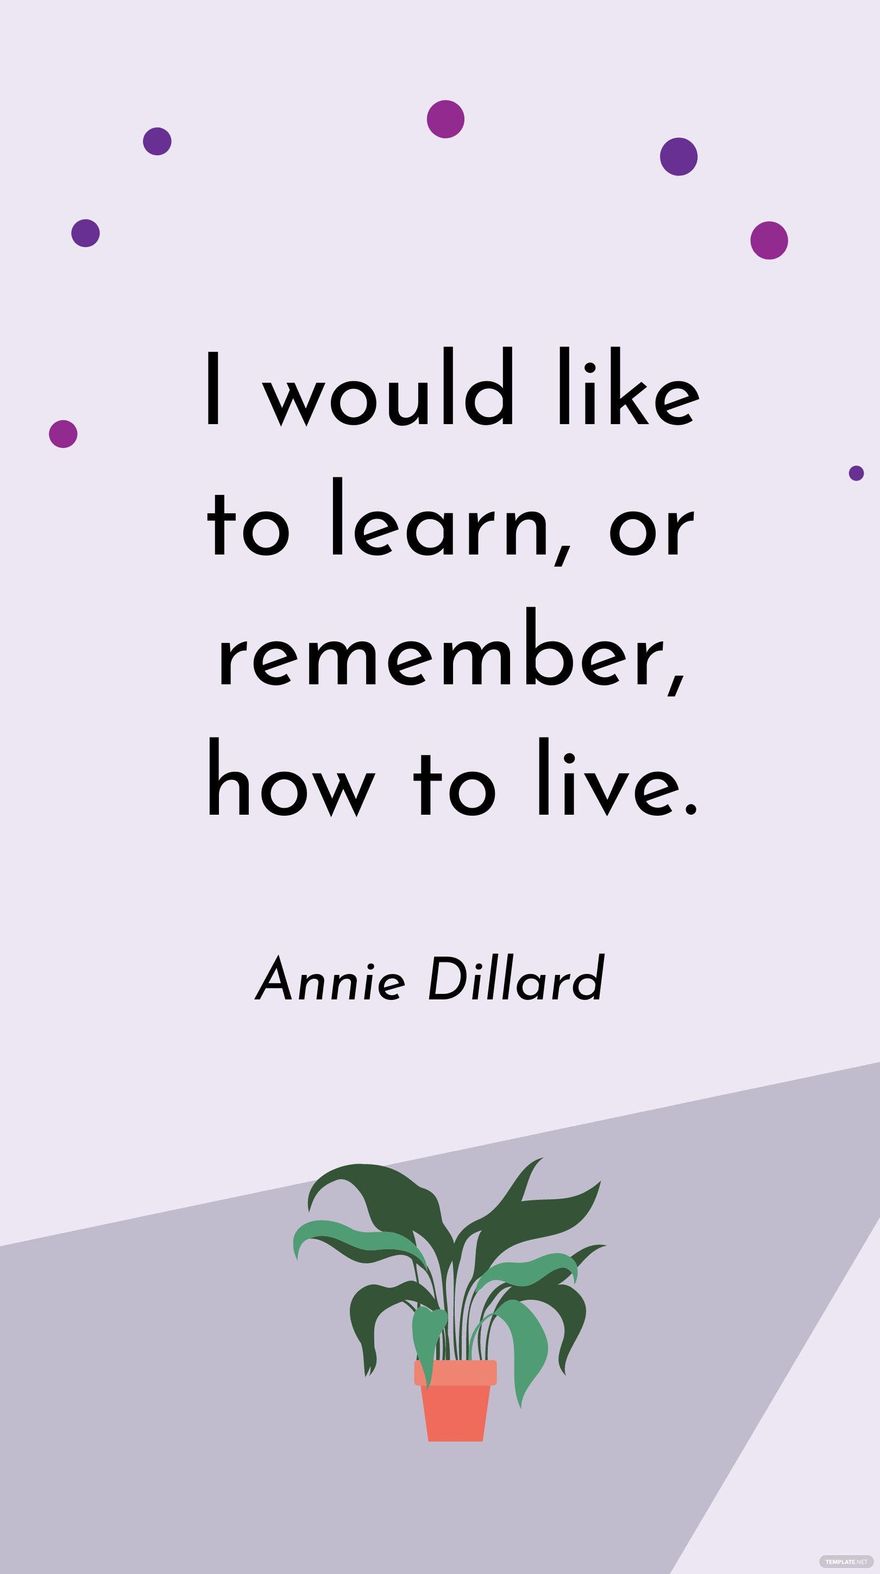 Free Annie Dillard - I would like to learn, or remember, how to live. in JPG